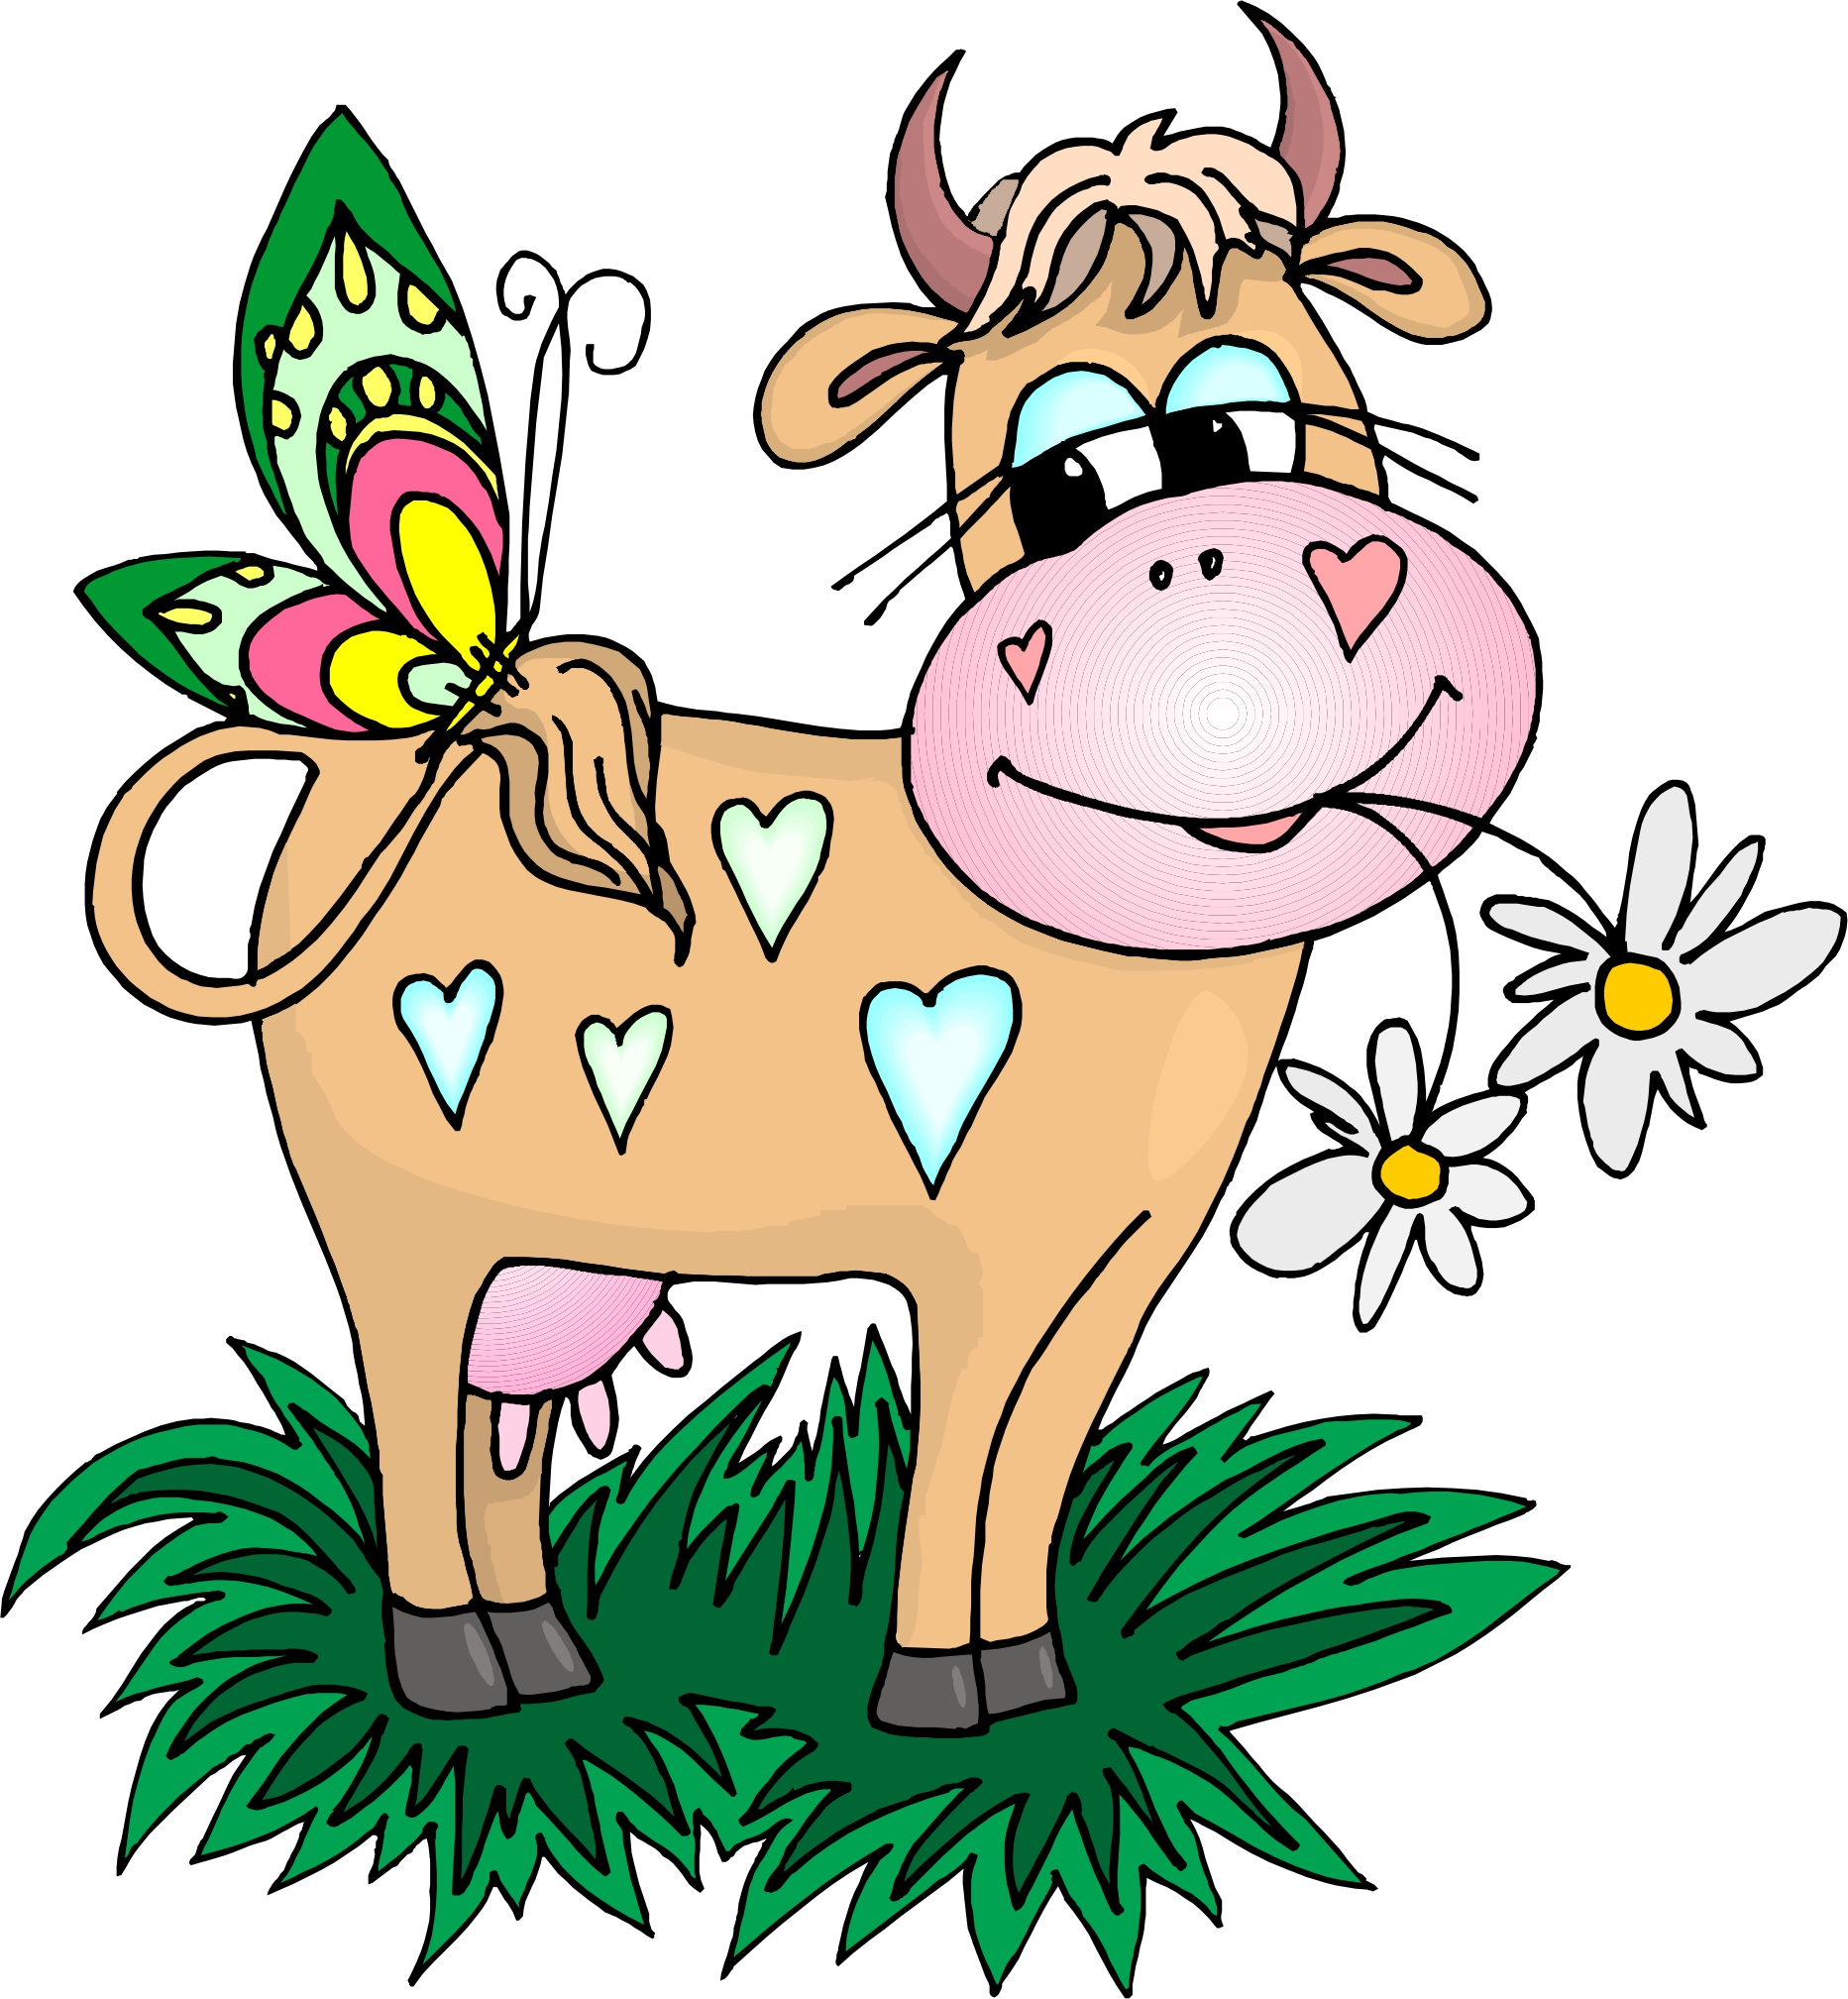 Cow Cartoon Characters - ClipArt Best